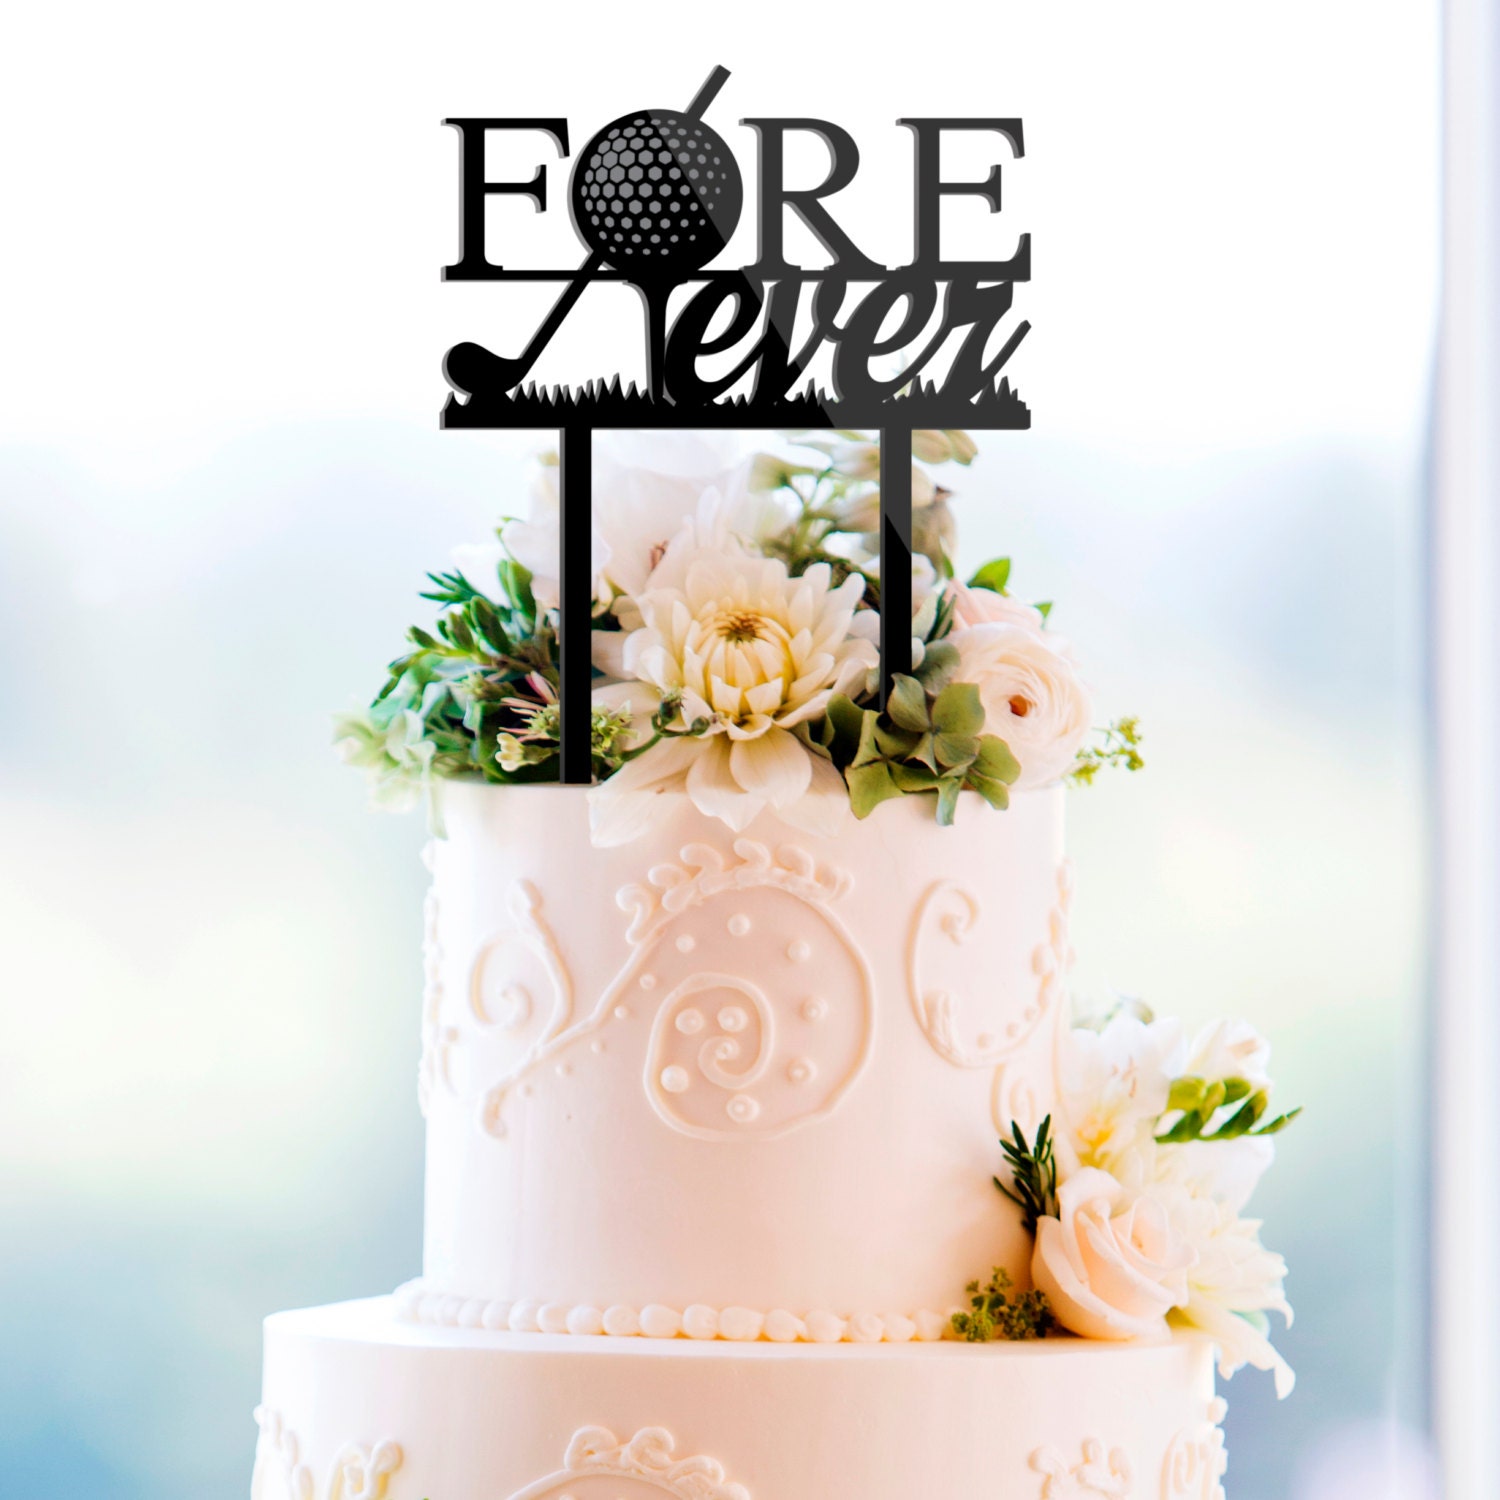 FOREVER Golf theme Wedding Cake Topper in Black by